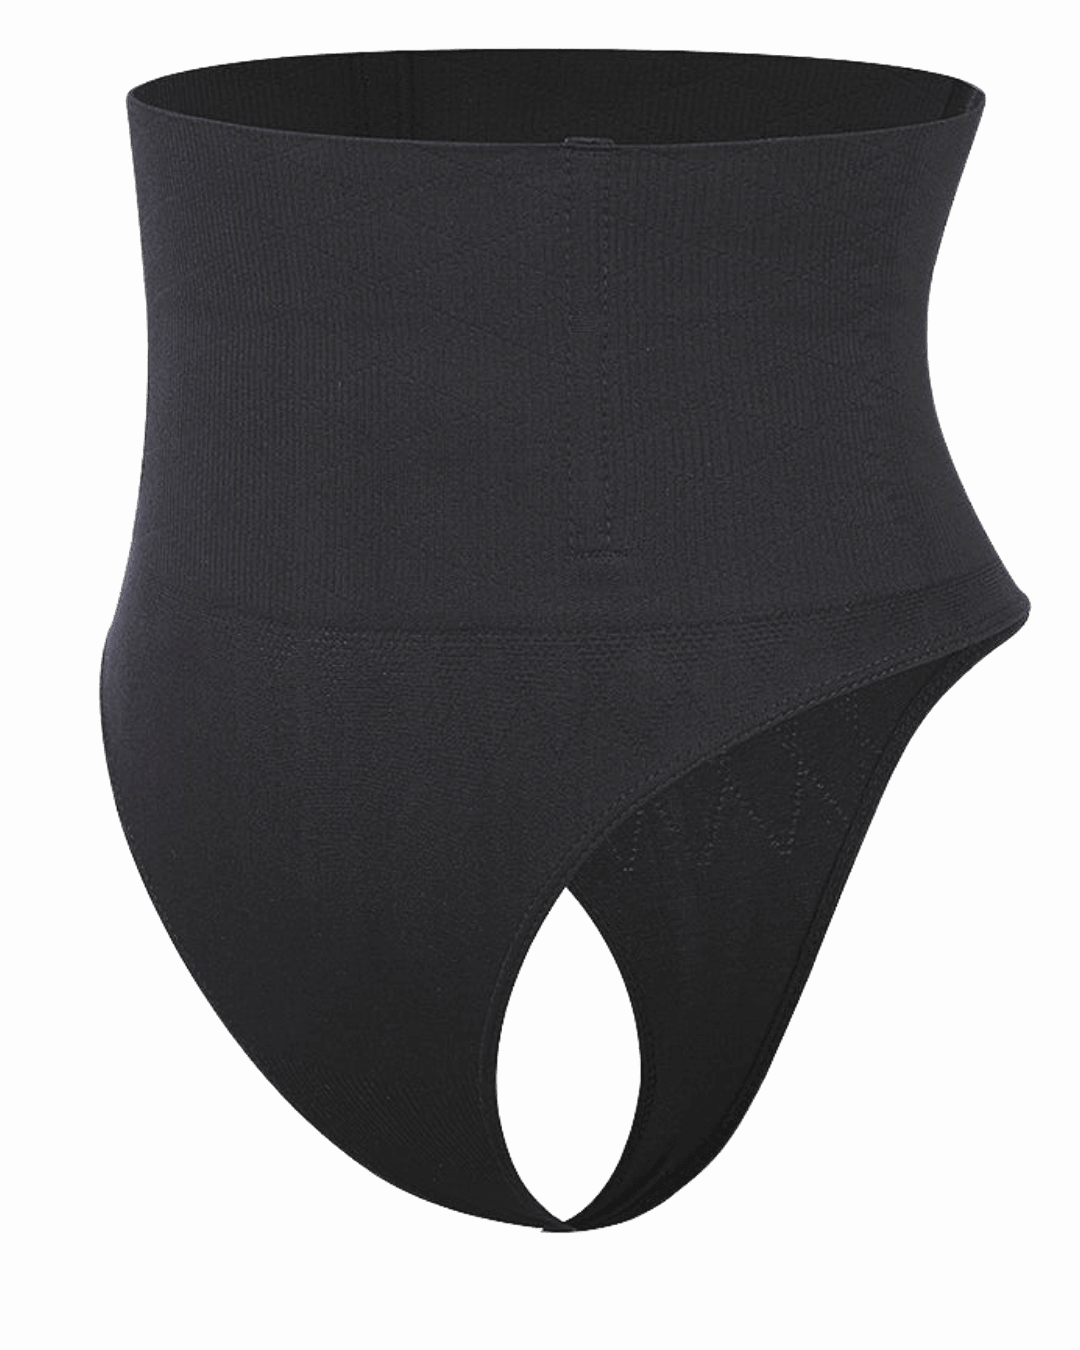 Every-day Tummy Control Thong - Wishe